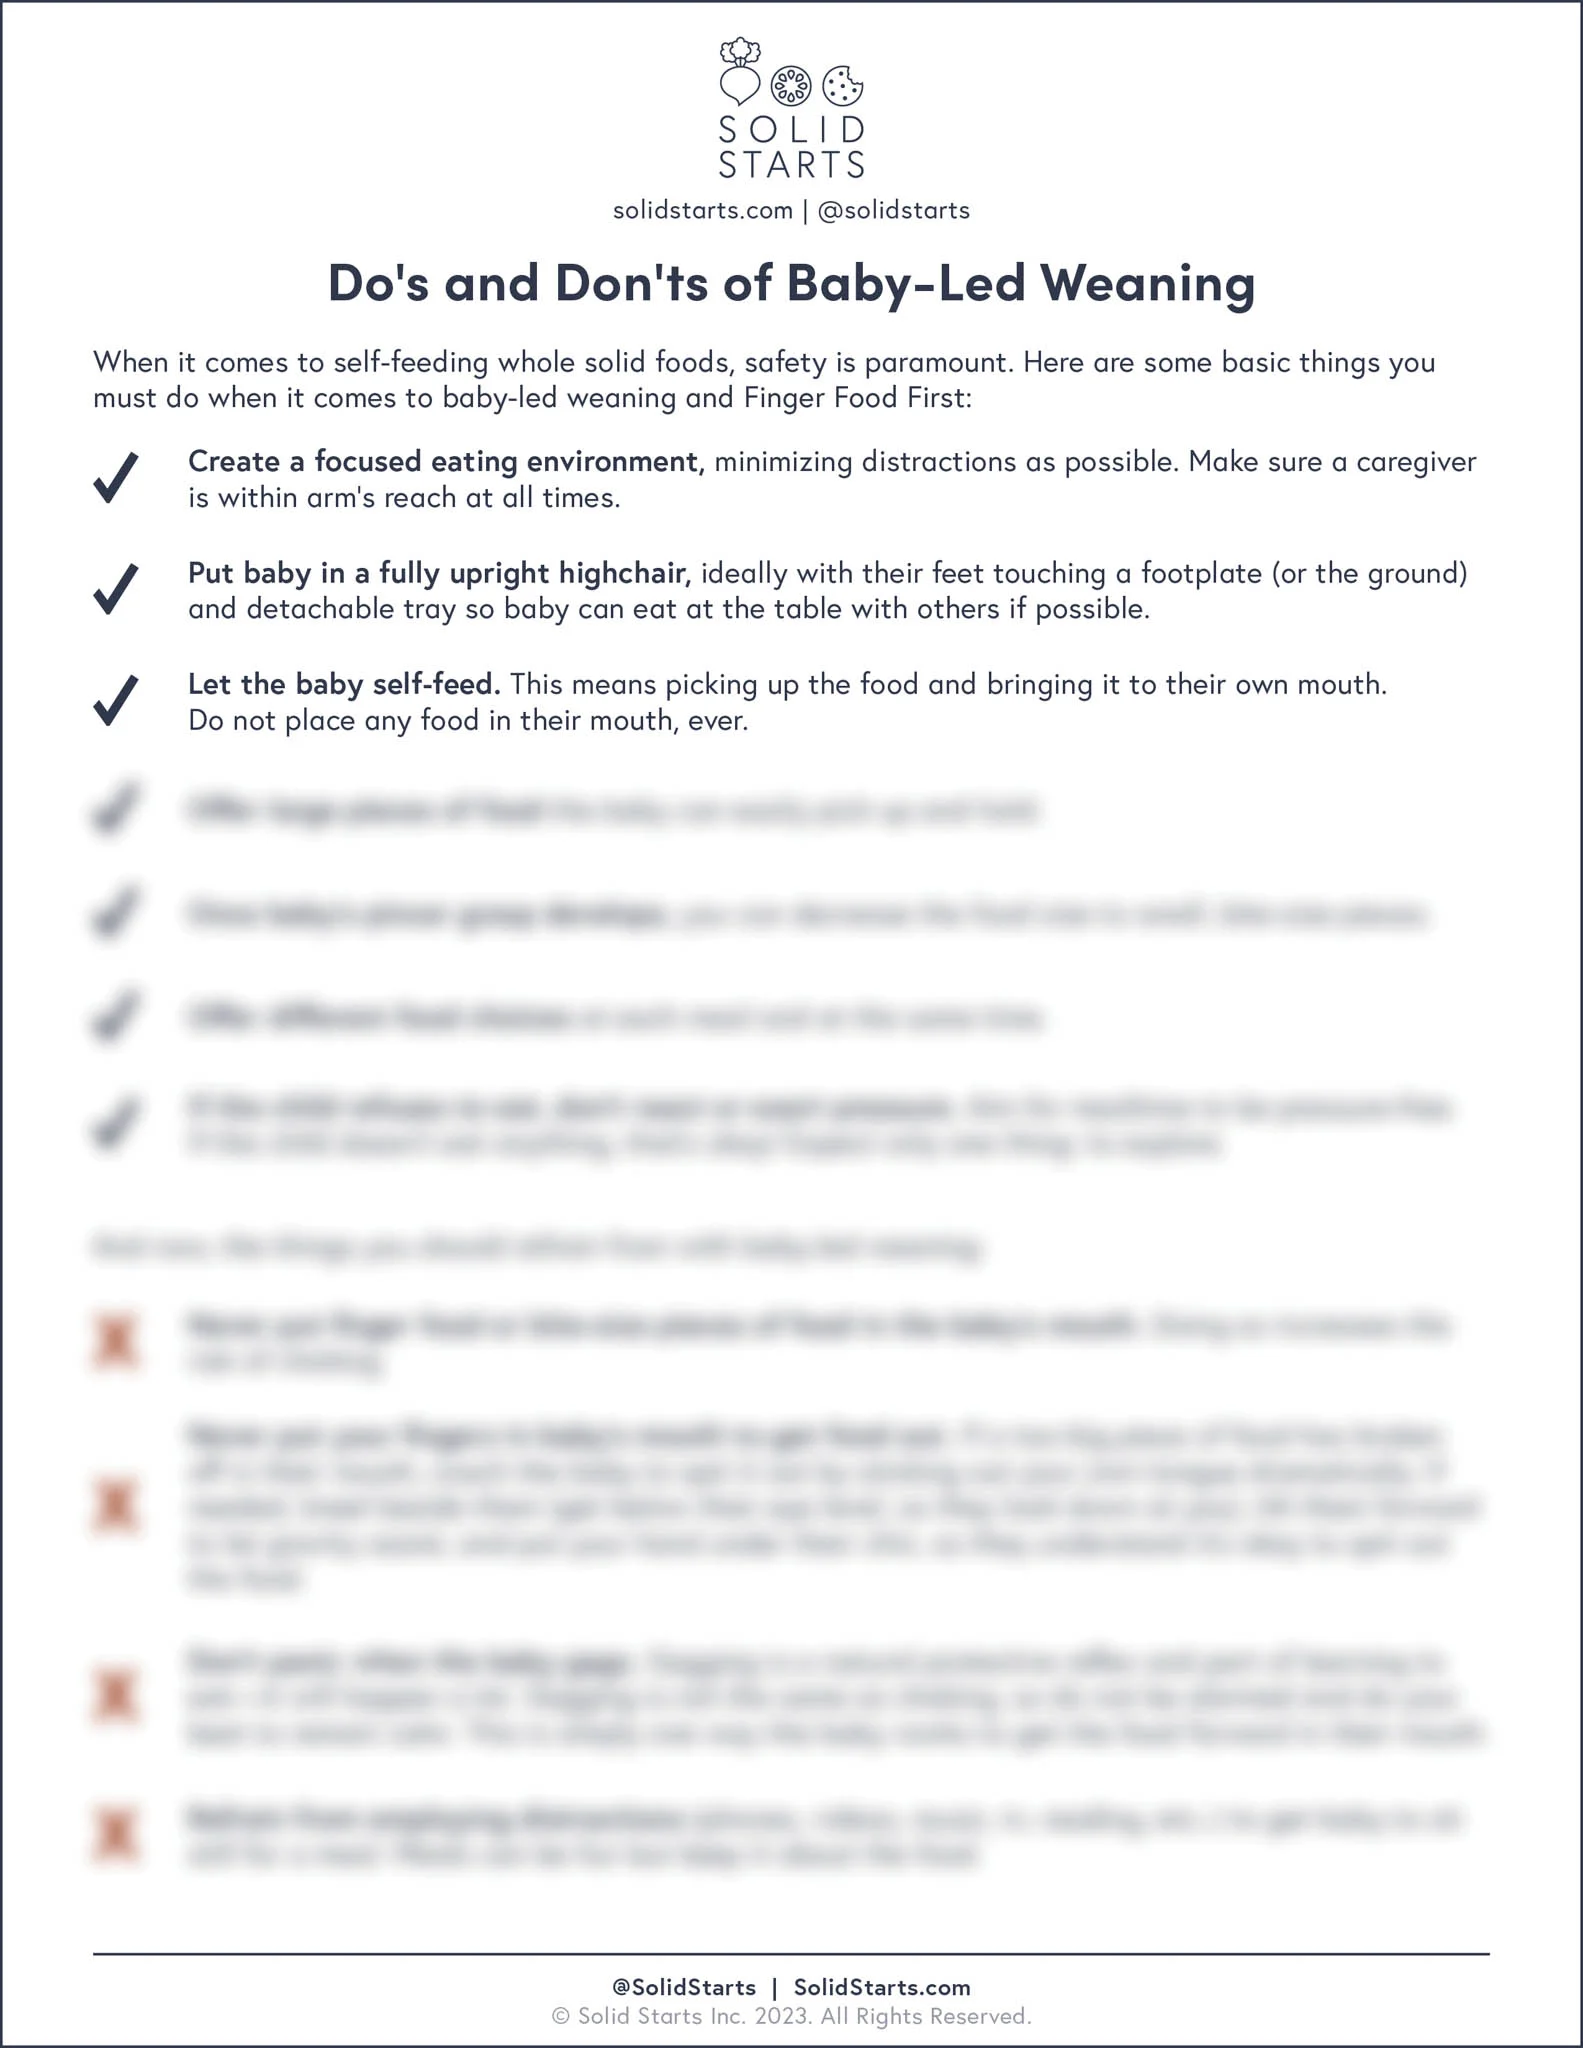 a blurred image of dos and don'ts for baby led weaning